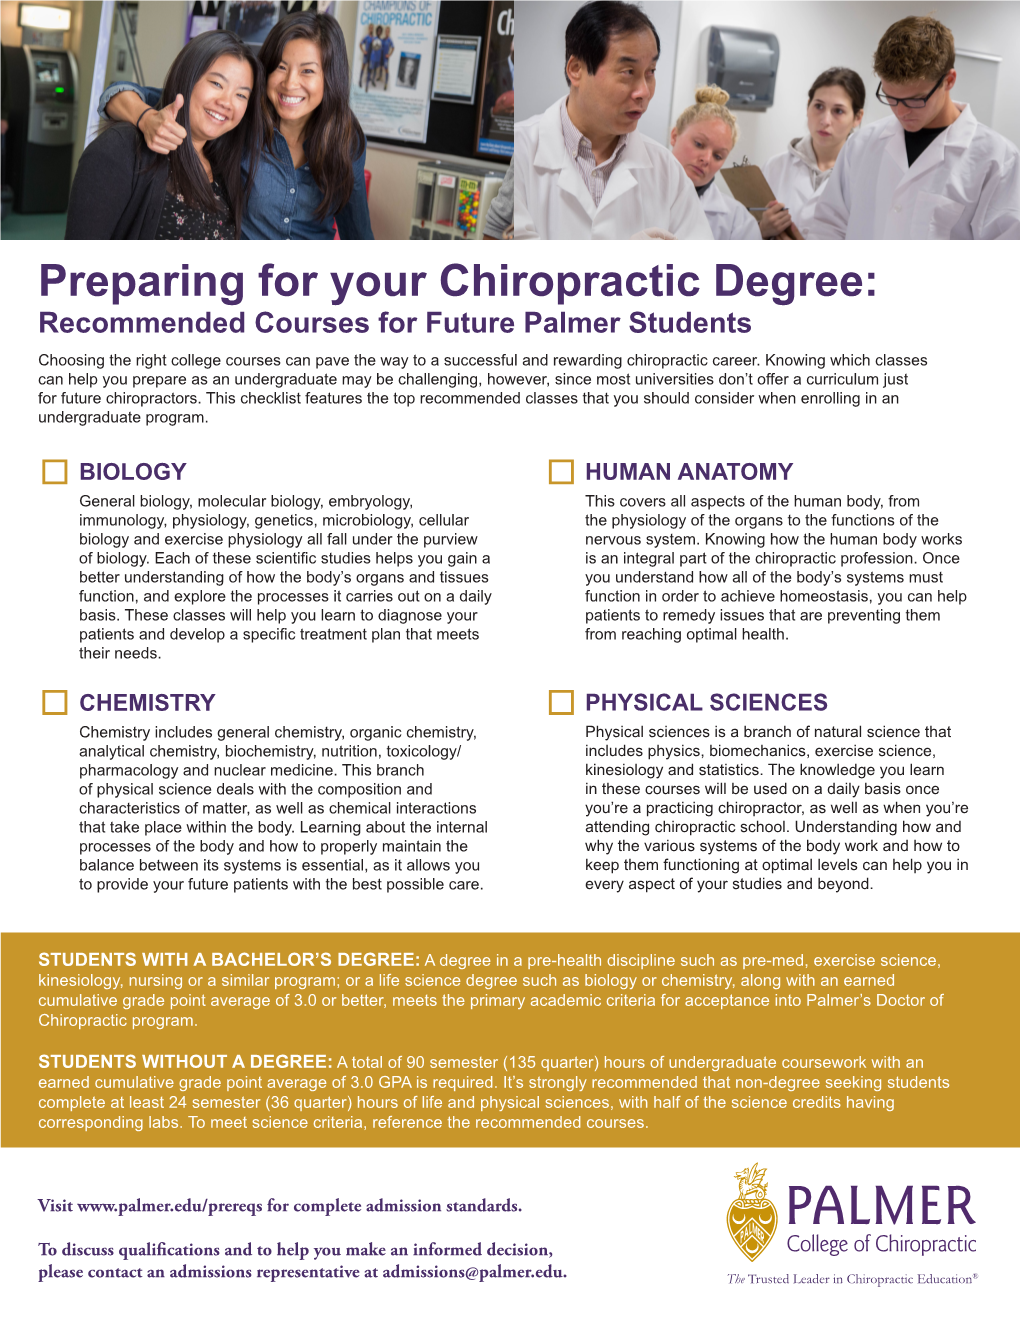 Preparing for Your Chiropractic Degree